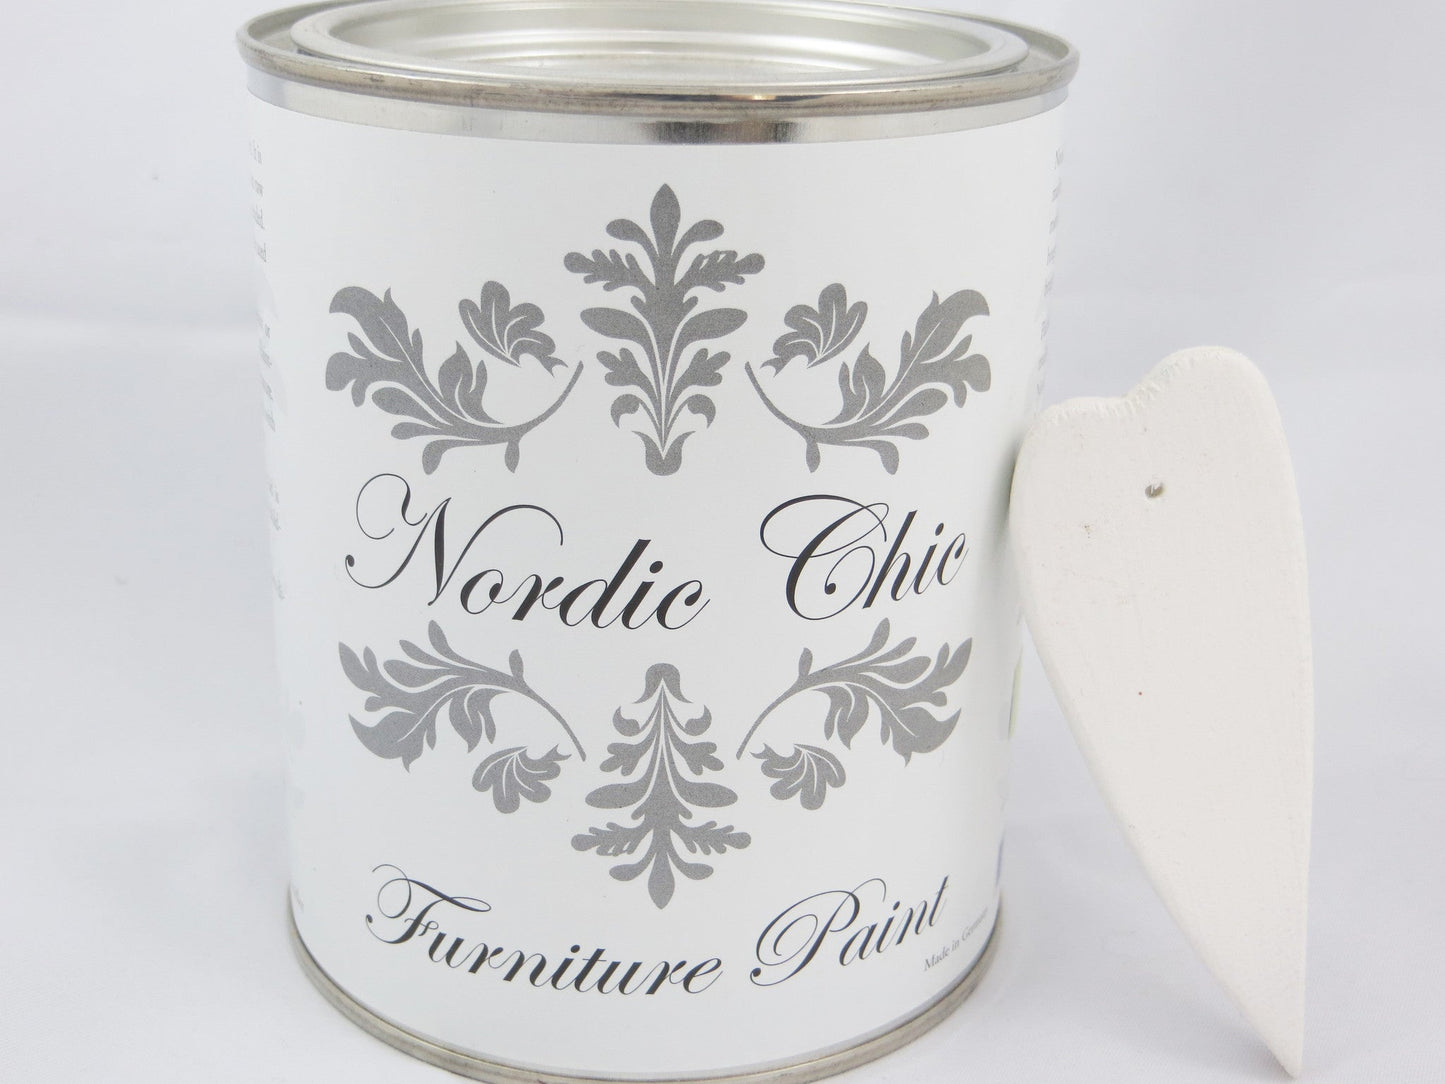 Nordic Chic Furniture Paint - Whipped Cream - Nordic Chic®